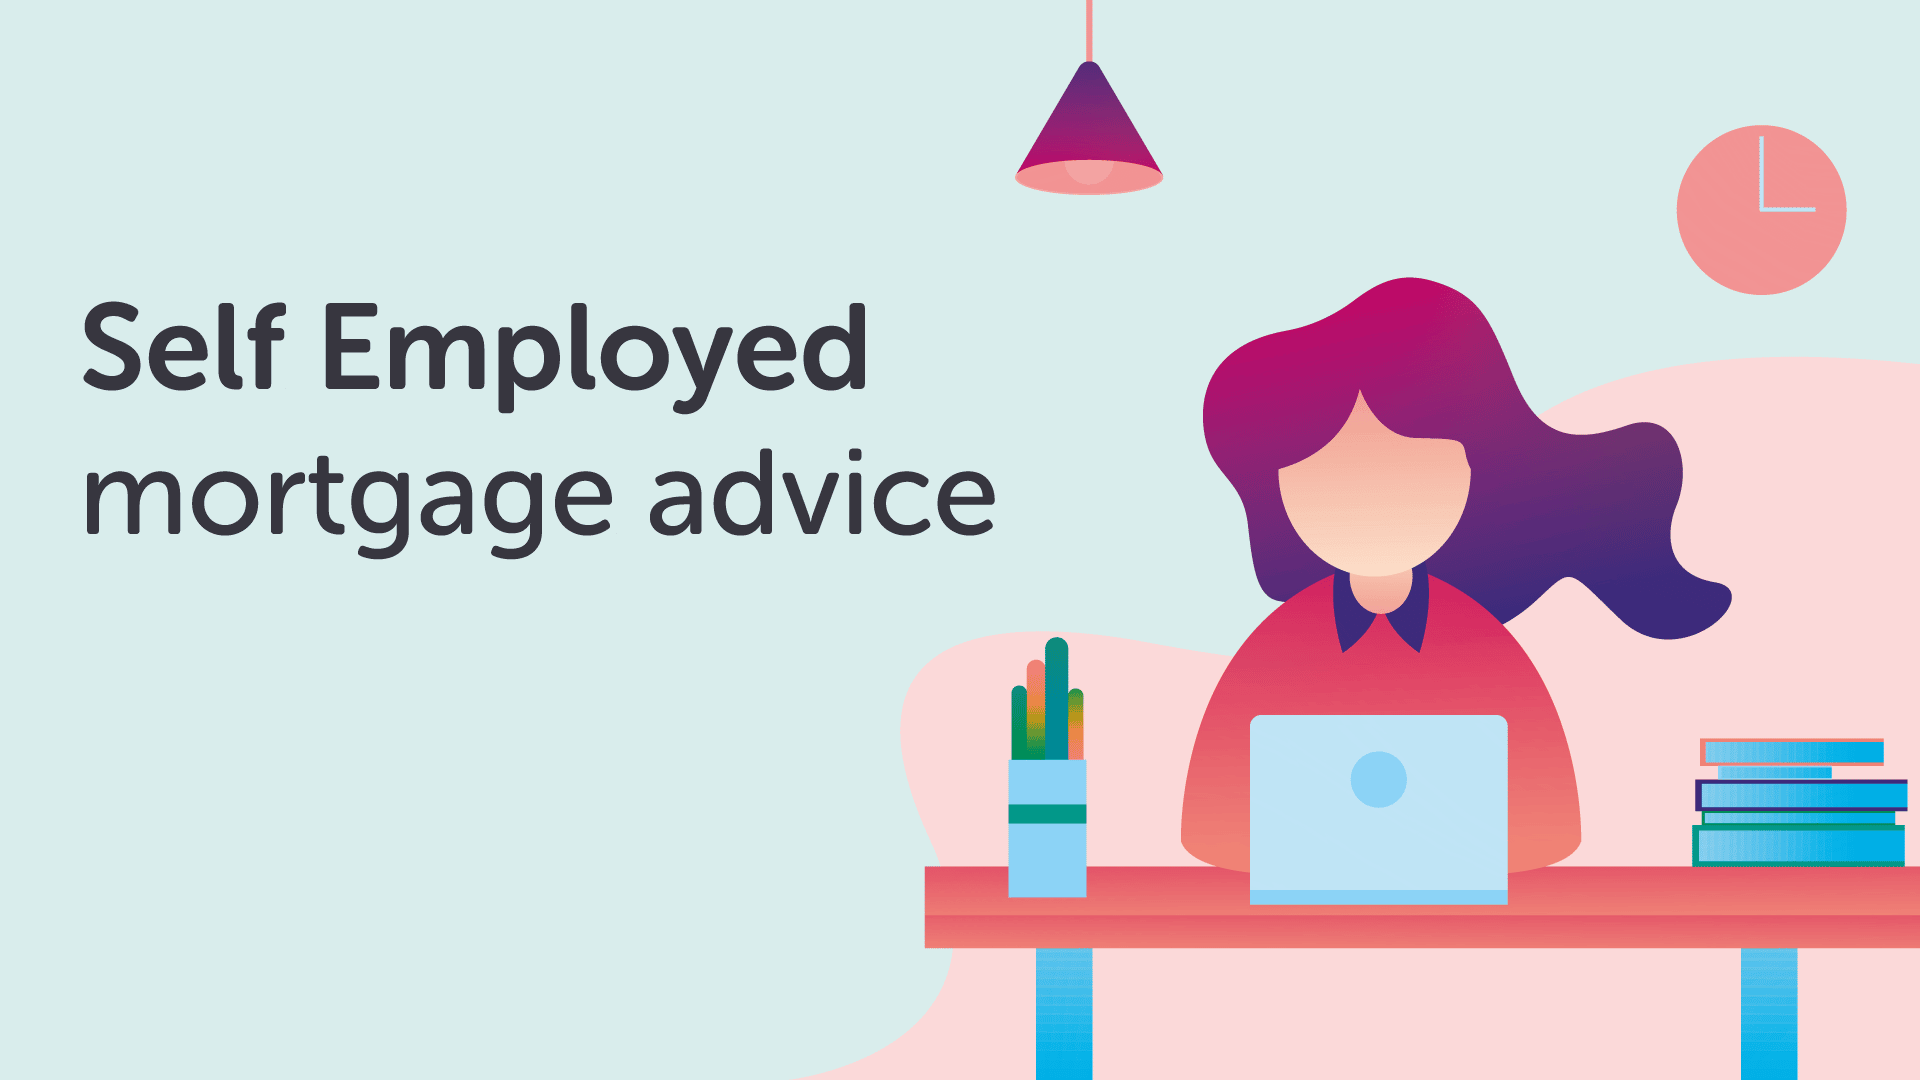 Self Employed Mortgages in Bristol